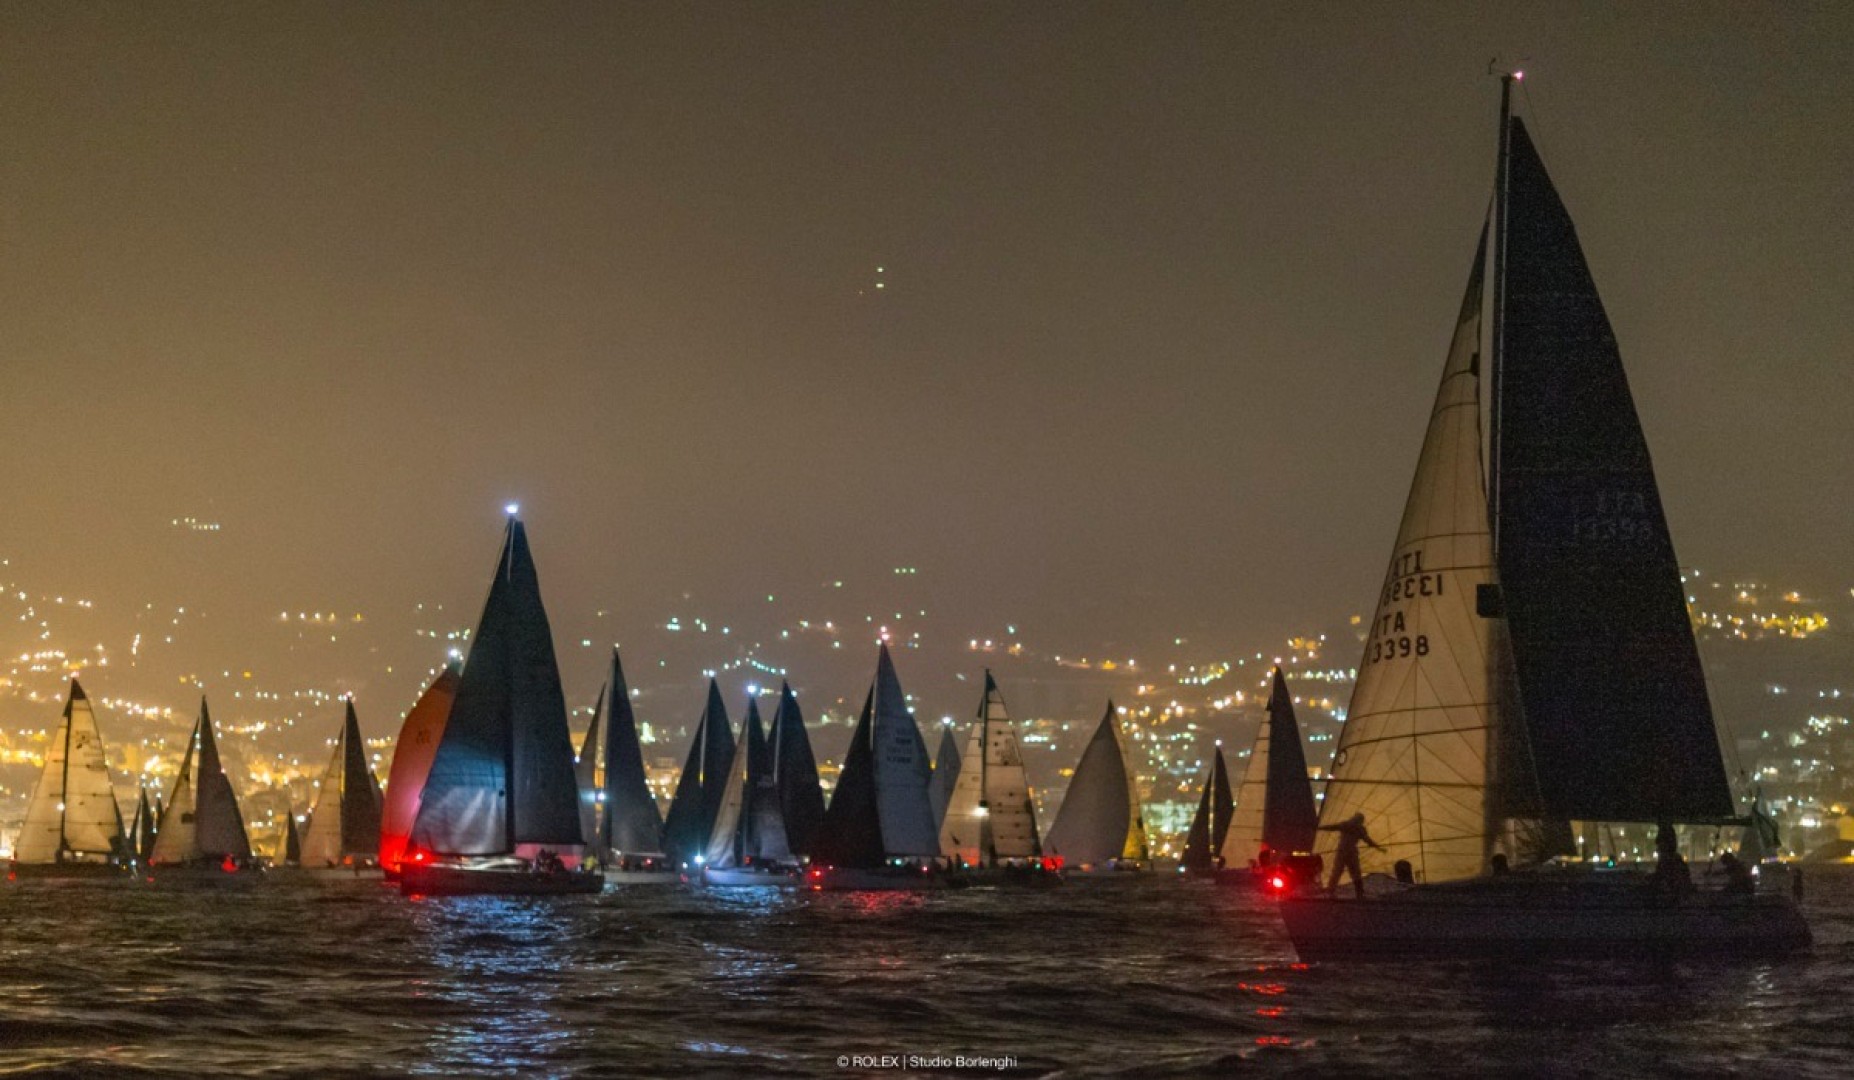 59 yachts set out last night for the first act of the Rolex Giraglia